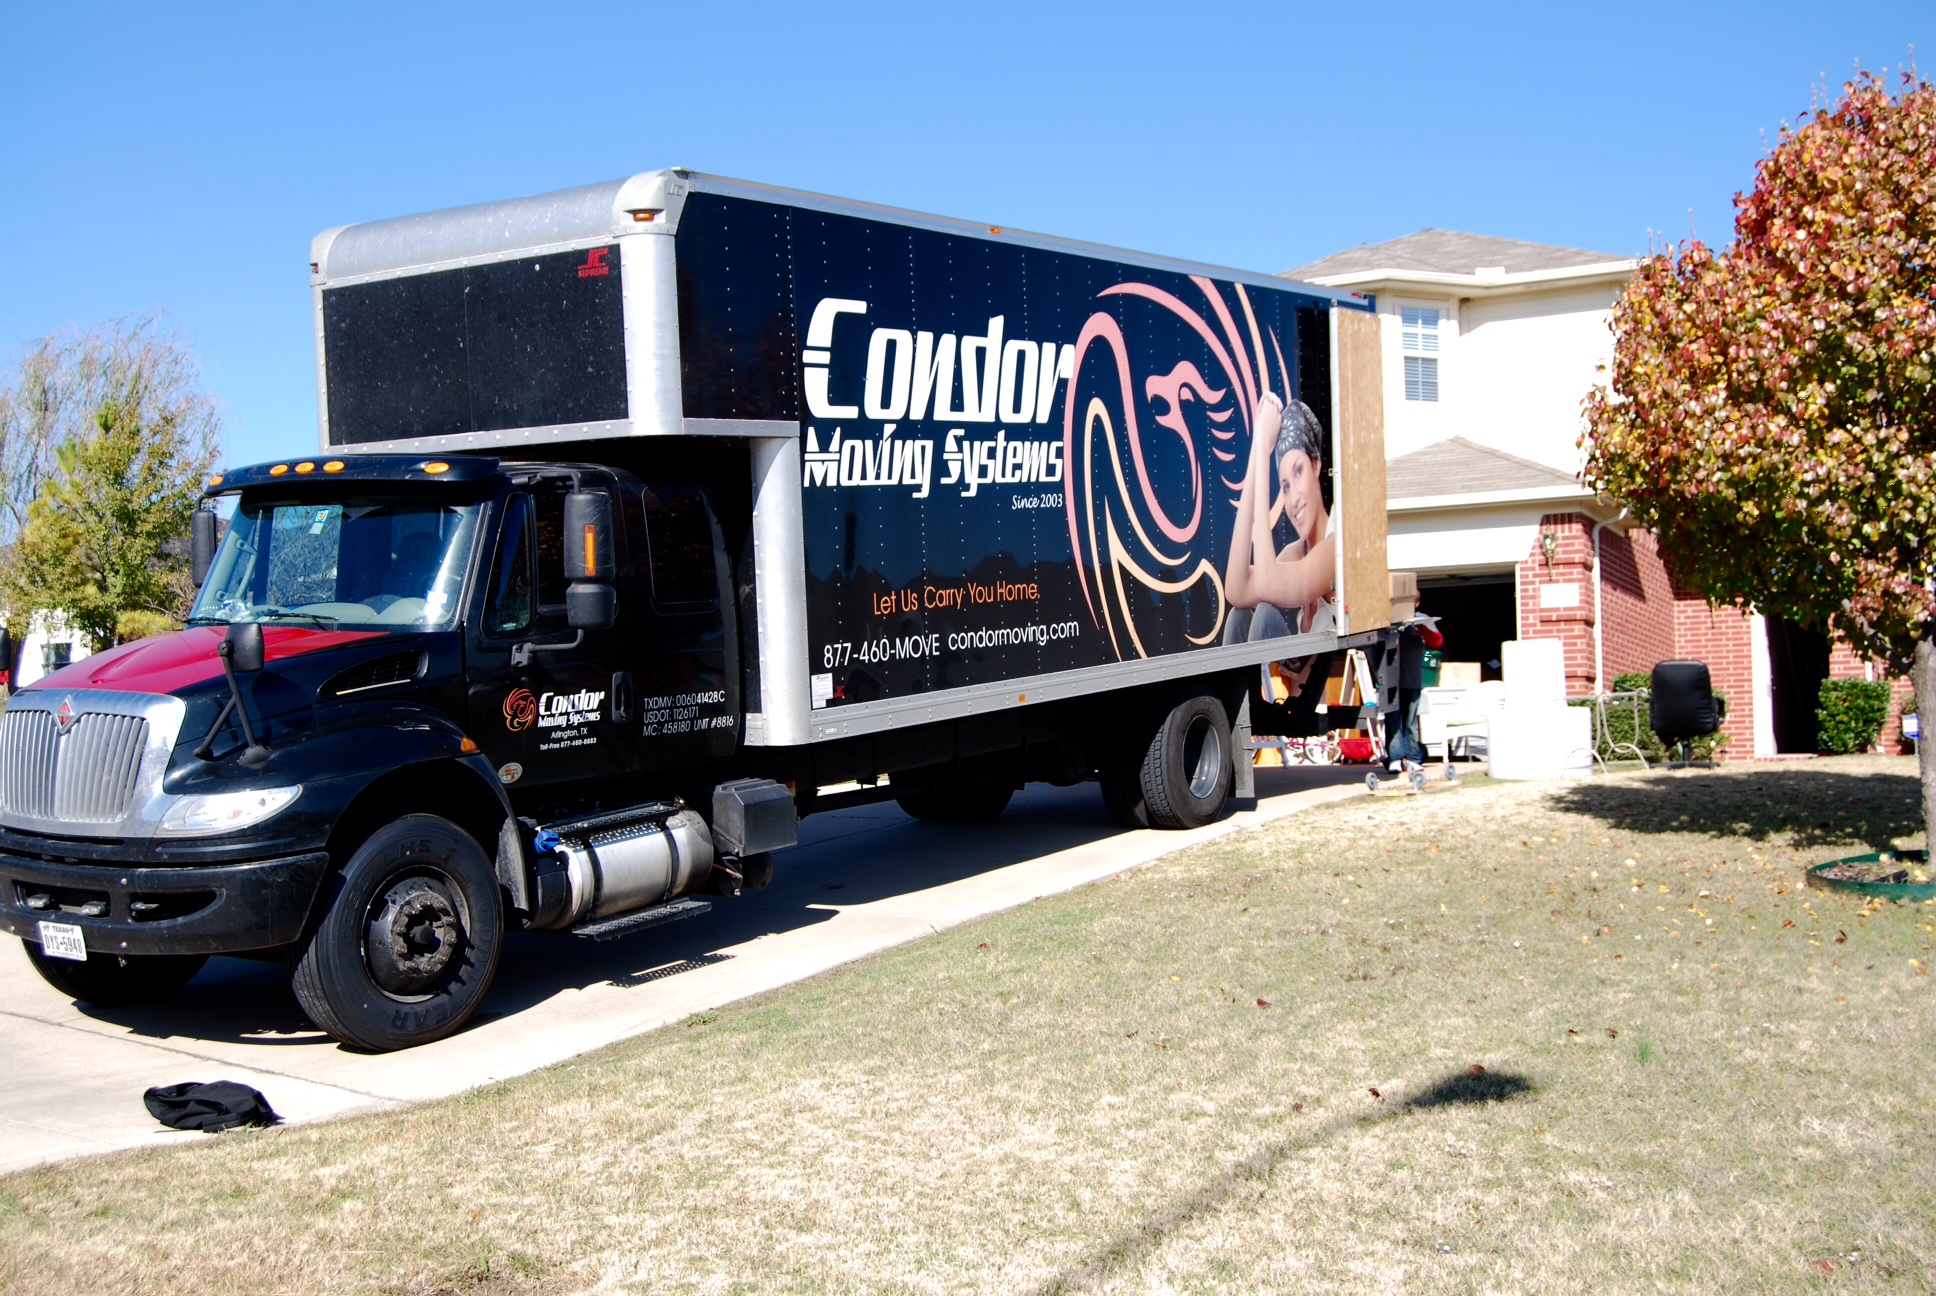 Condor Moving Systems Photo